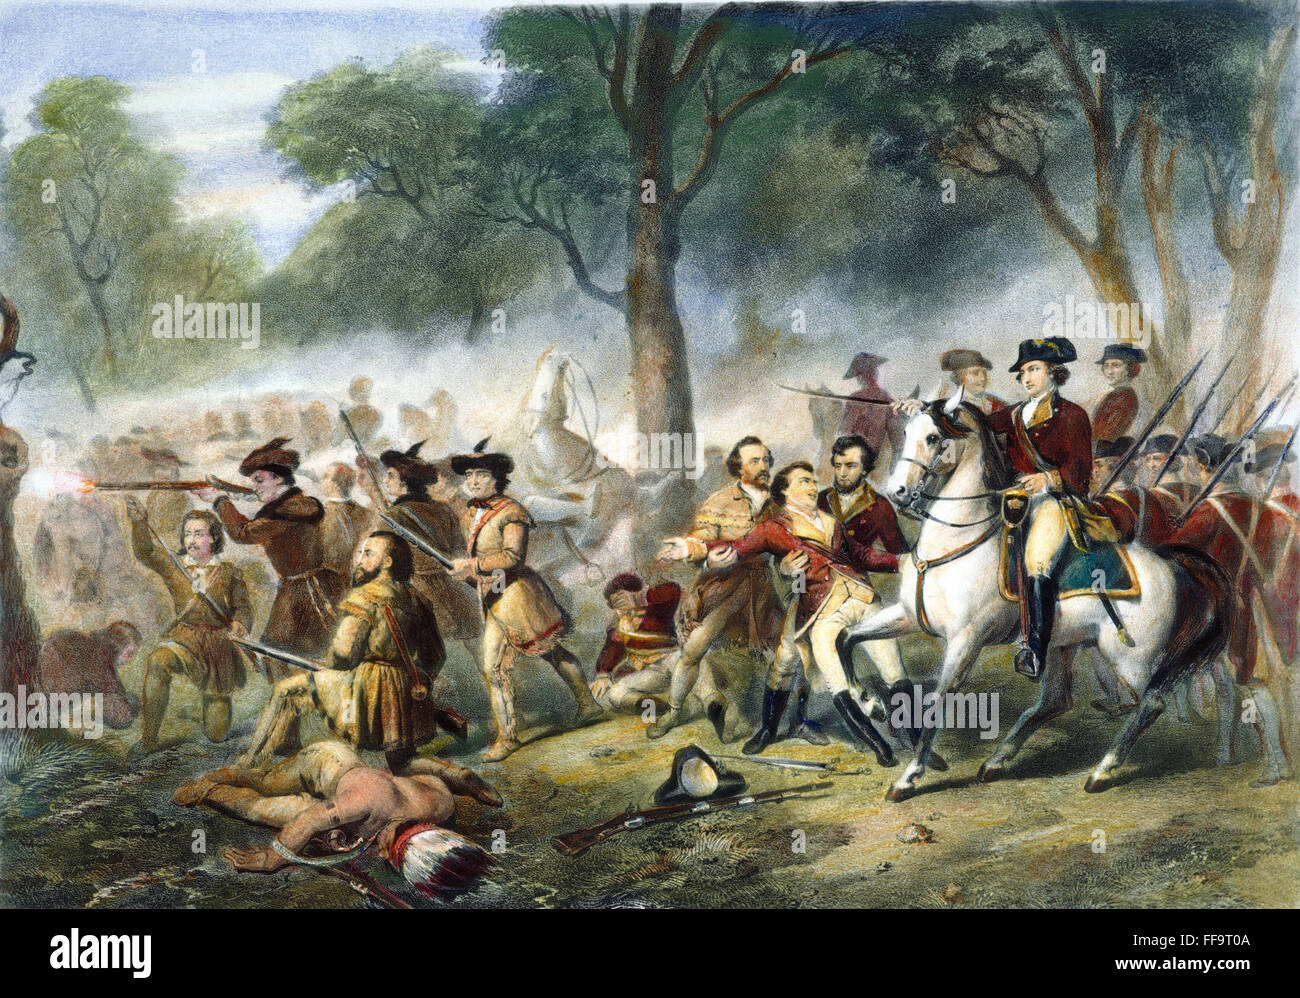 WASHINGTON: MONONGAHELA. /nGeorge Washington, on horseback, at the Battle of the Monongahela, July 9, 1755, after Braddock's army was attacked by French forces from Fort Duquesne. Lithograph, French, 1854, after a painting by Junius Brutus Stearns. Stock Photo